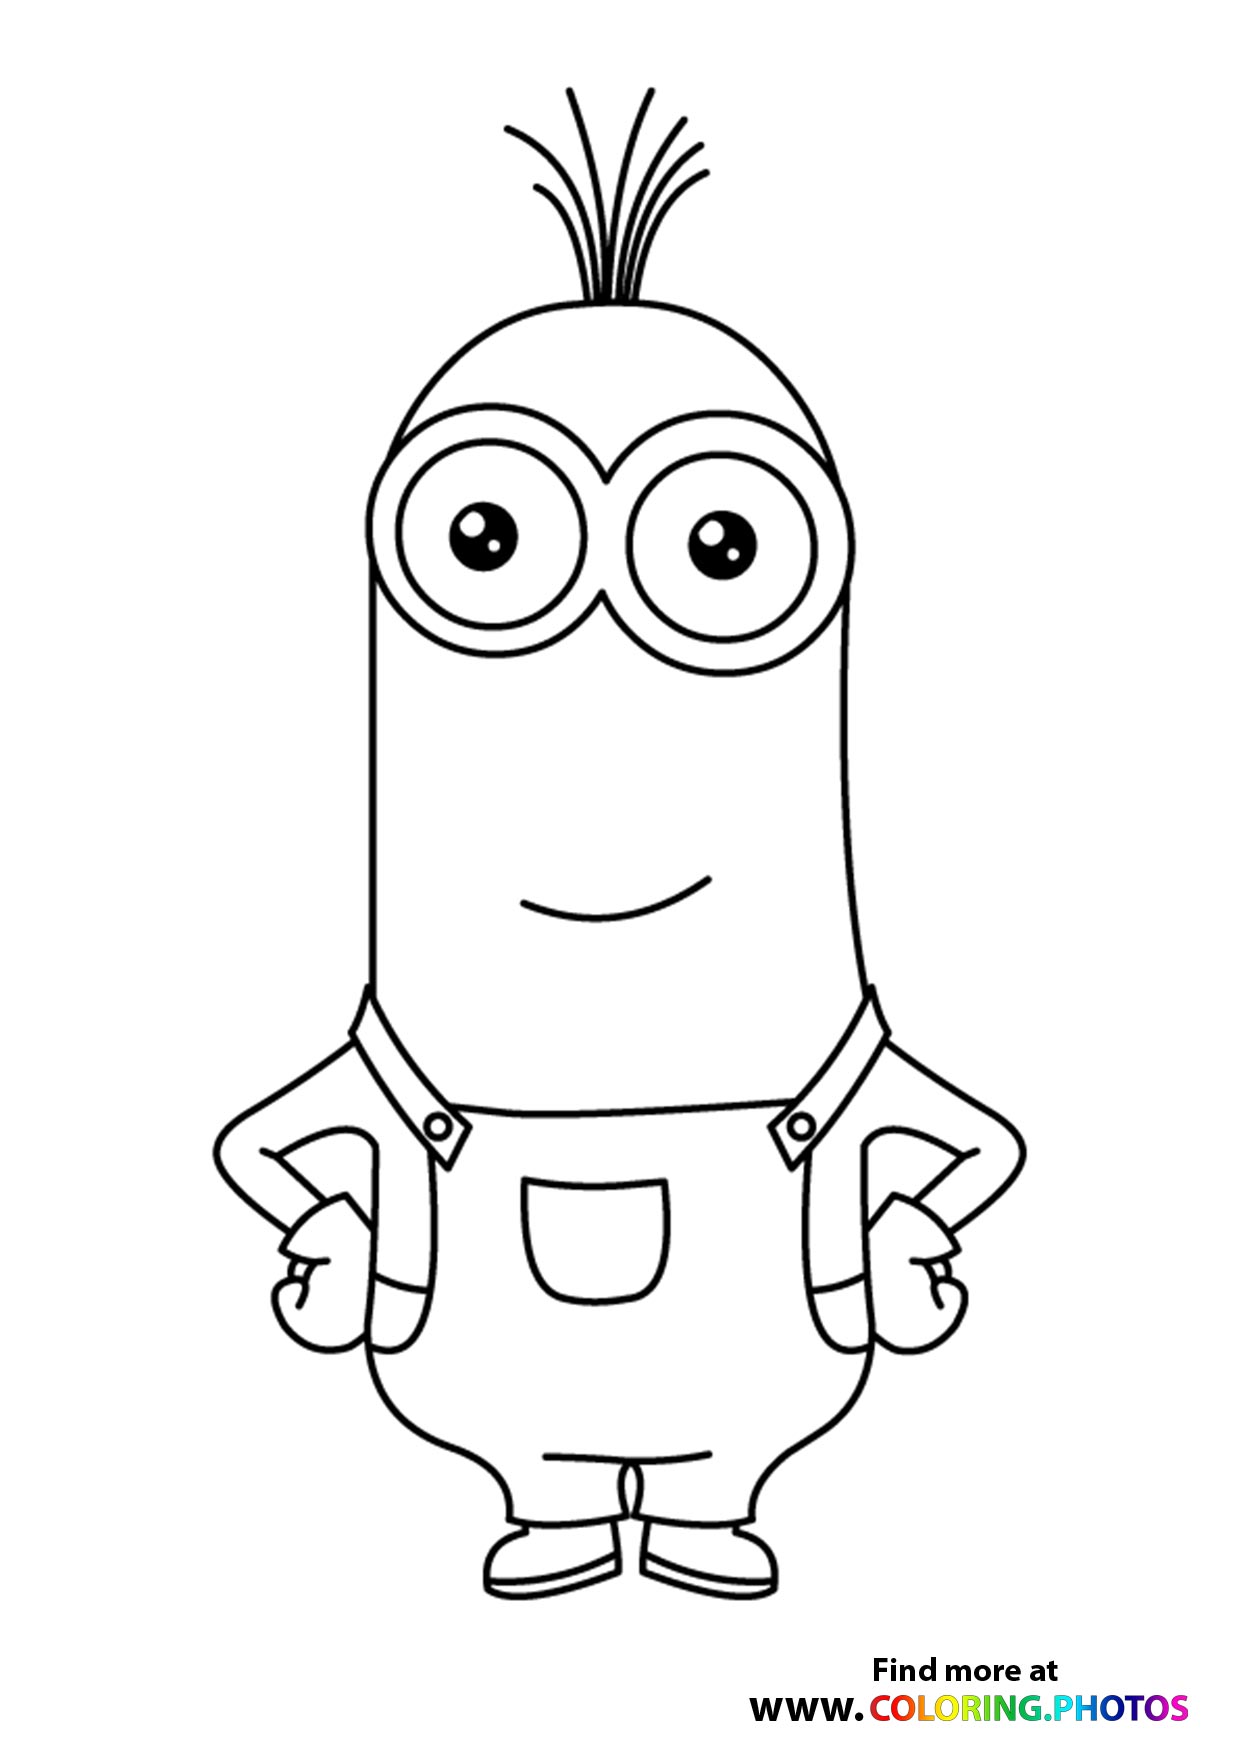 How to draw Bob minion from Minions easy step by step video lesson for  beginners - YouTube